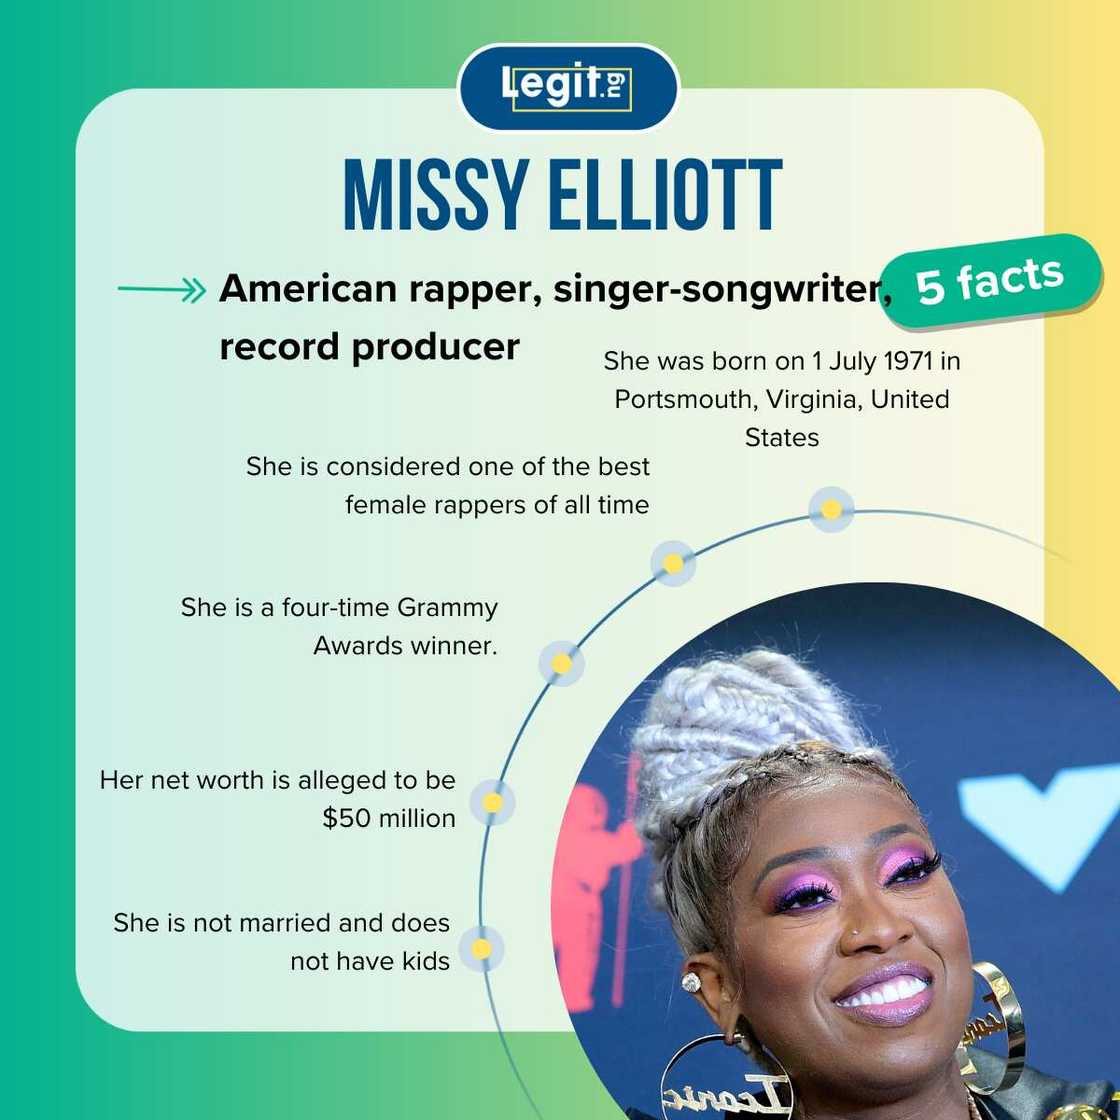 Five facts about Missy Elliott